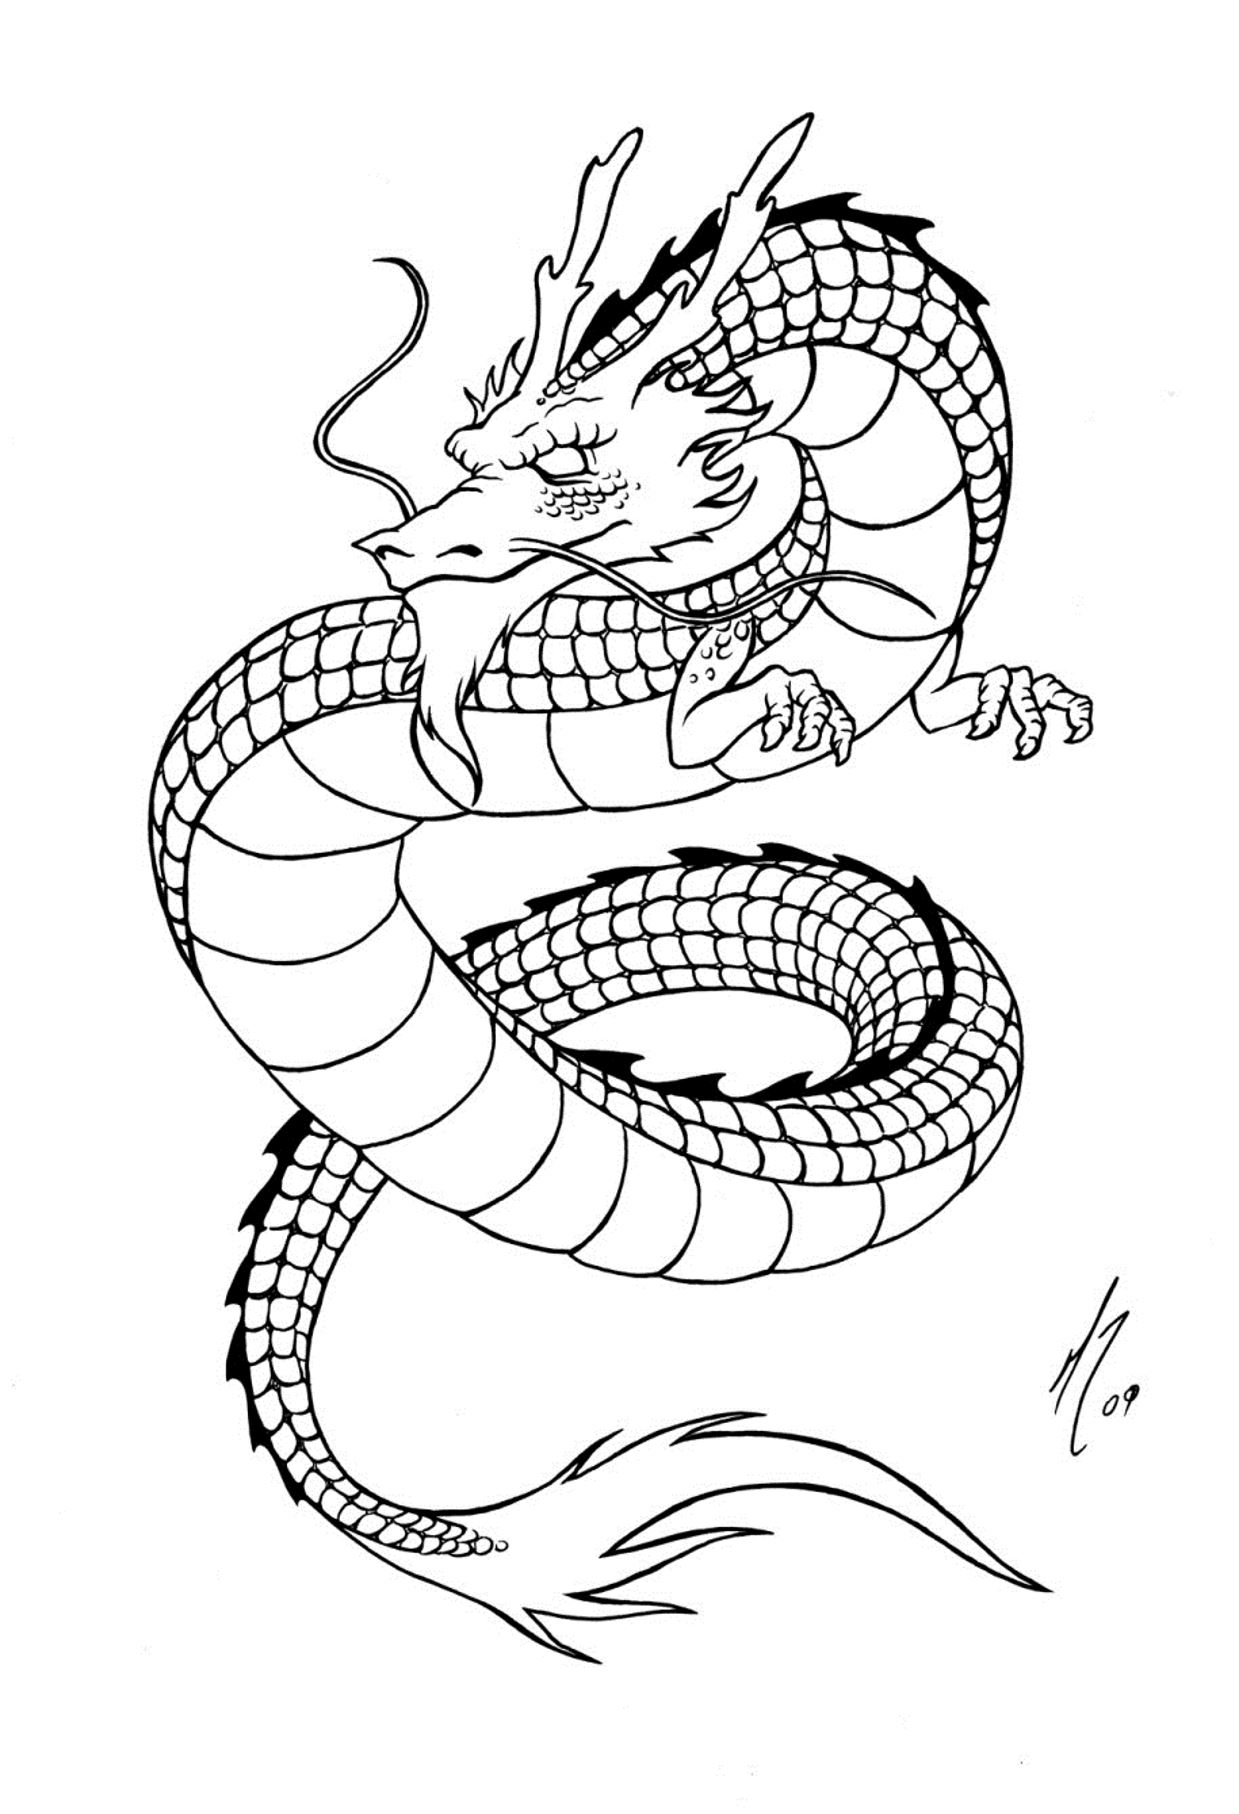 Tattoo chinese dragon - Tattoos Coloring Pages for Adults - Just Color.